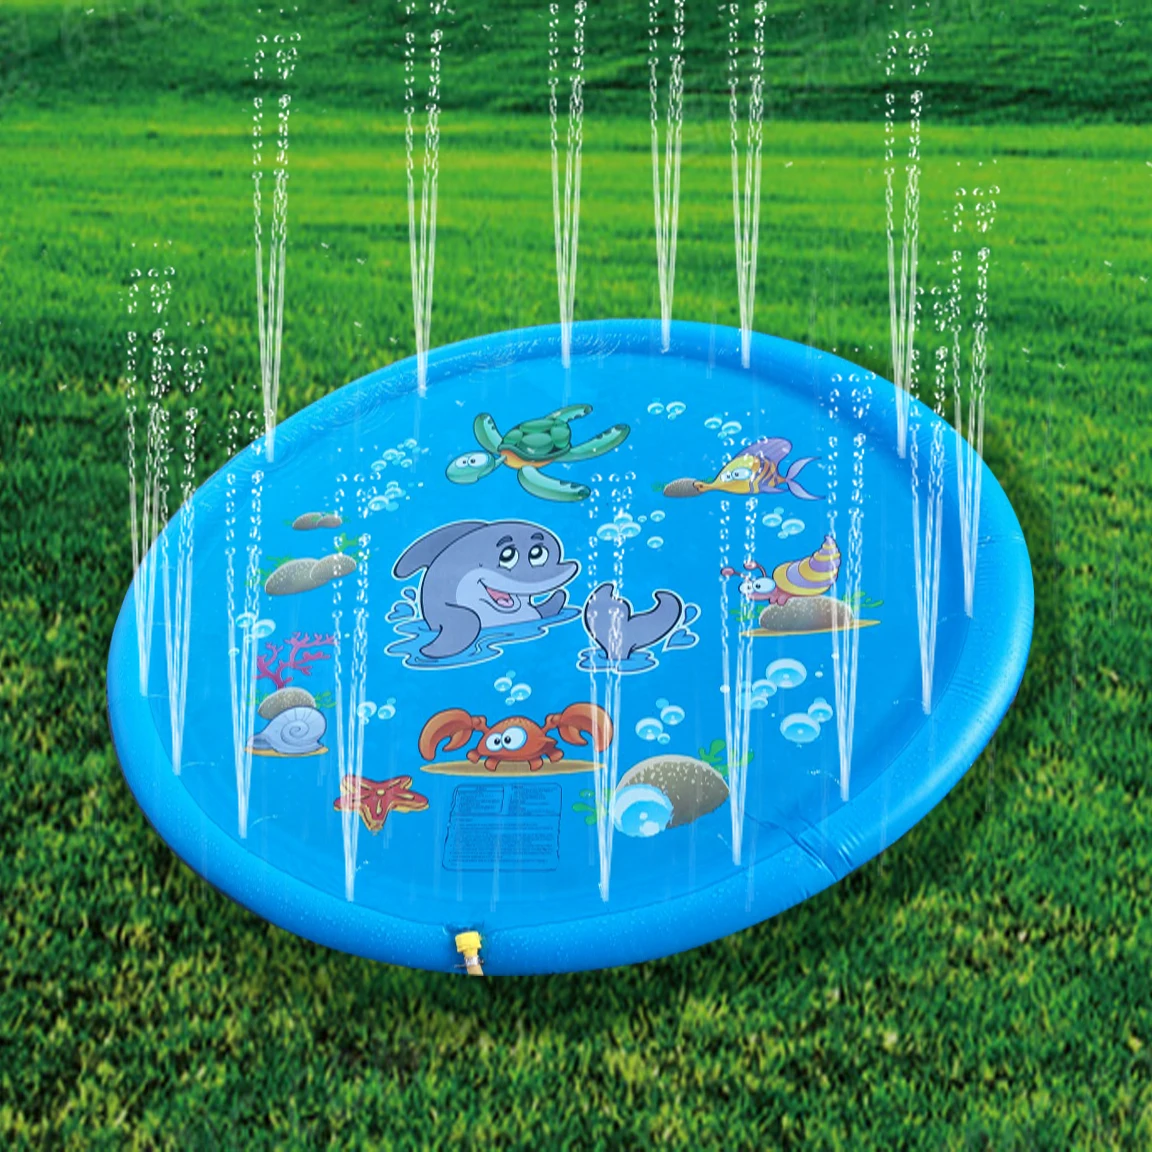 

KM 68" Sprinkle And Splash Play Mat Toy For Children Infants Toddlers And Kids Perfect Inflatable Outdoor Sprinkler Pad >=10, Blue